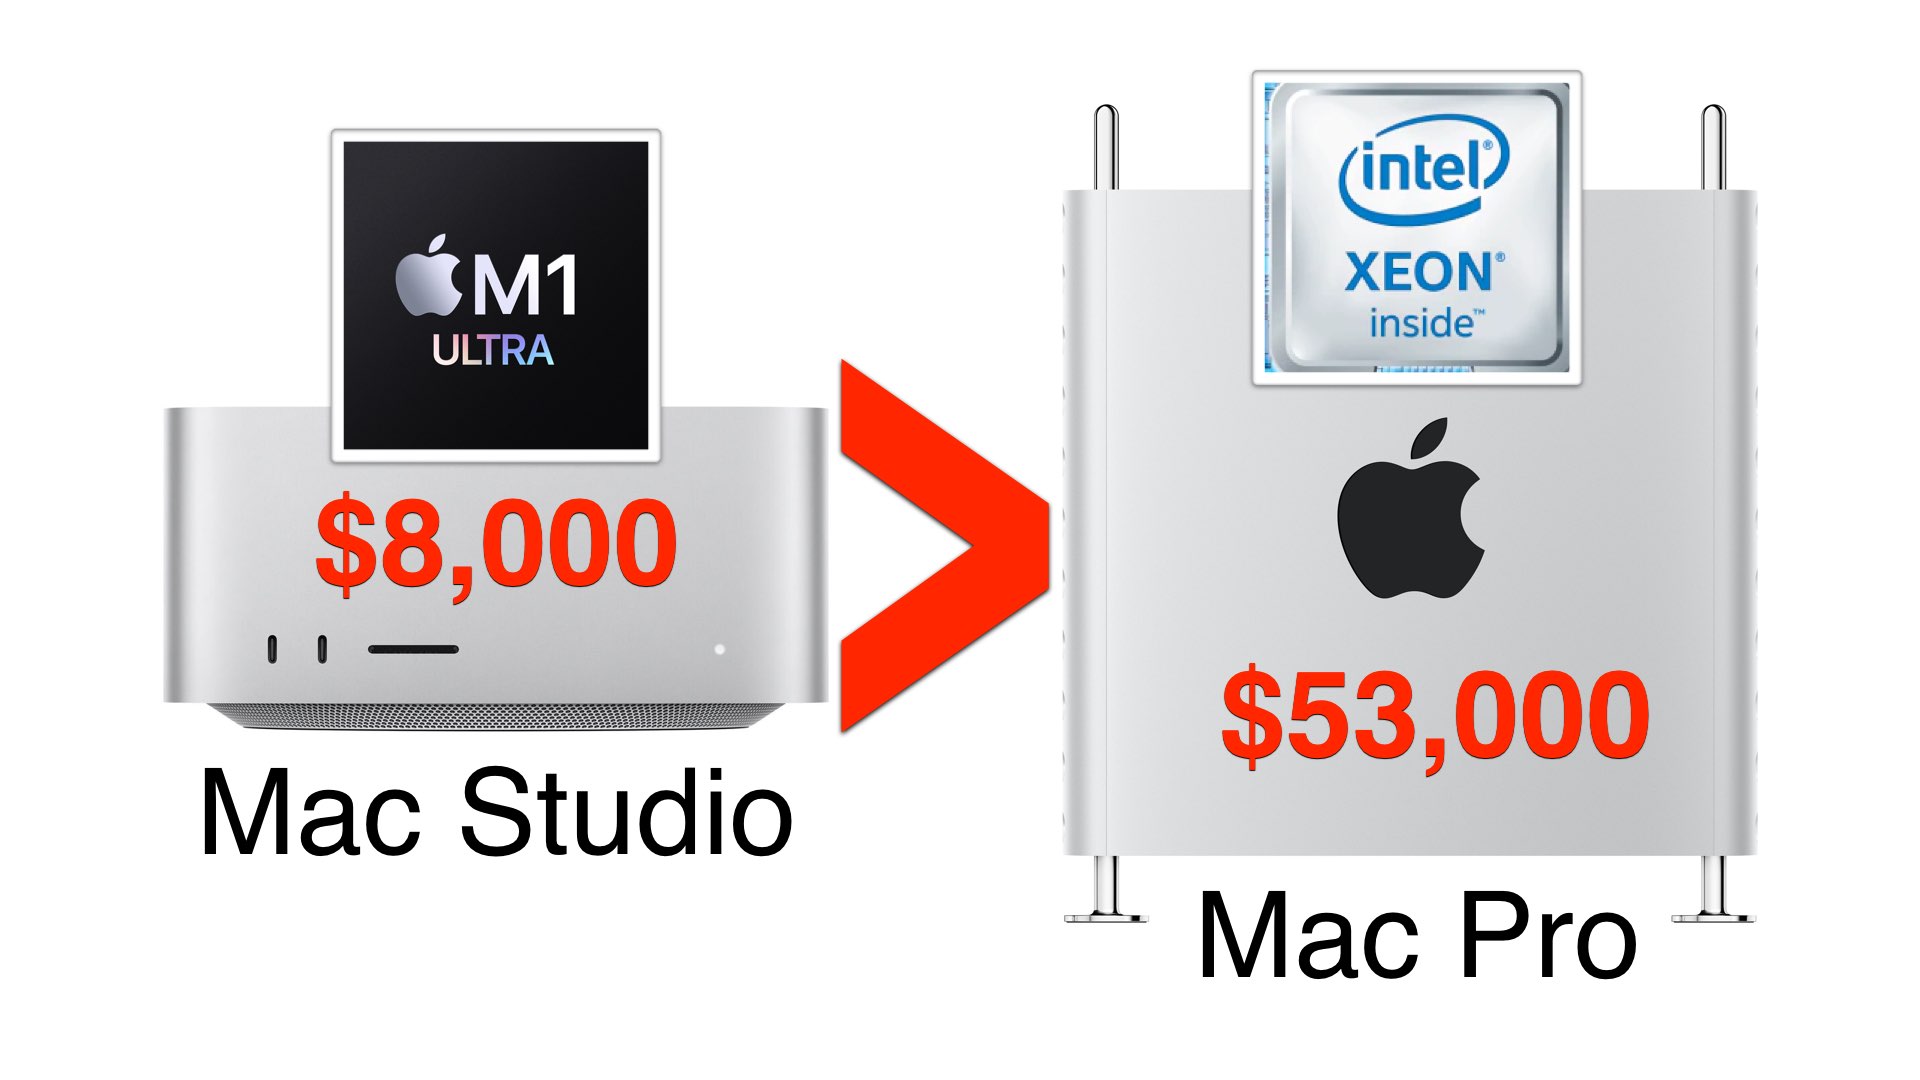 Mac Pro vs Mac Studio: Which is best for creative pros?